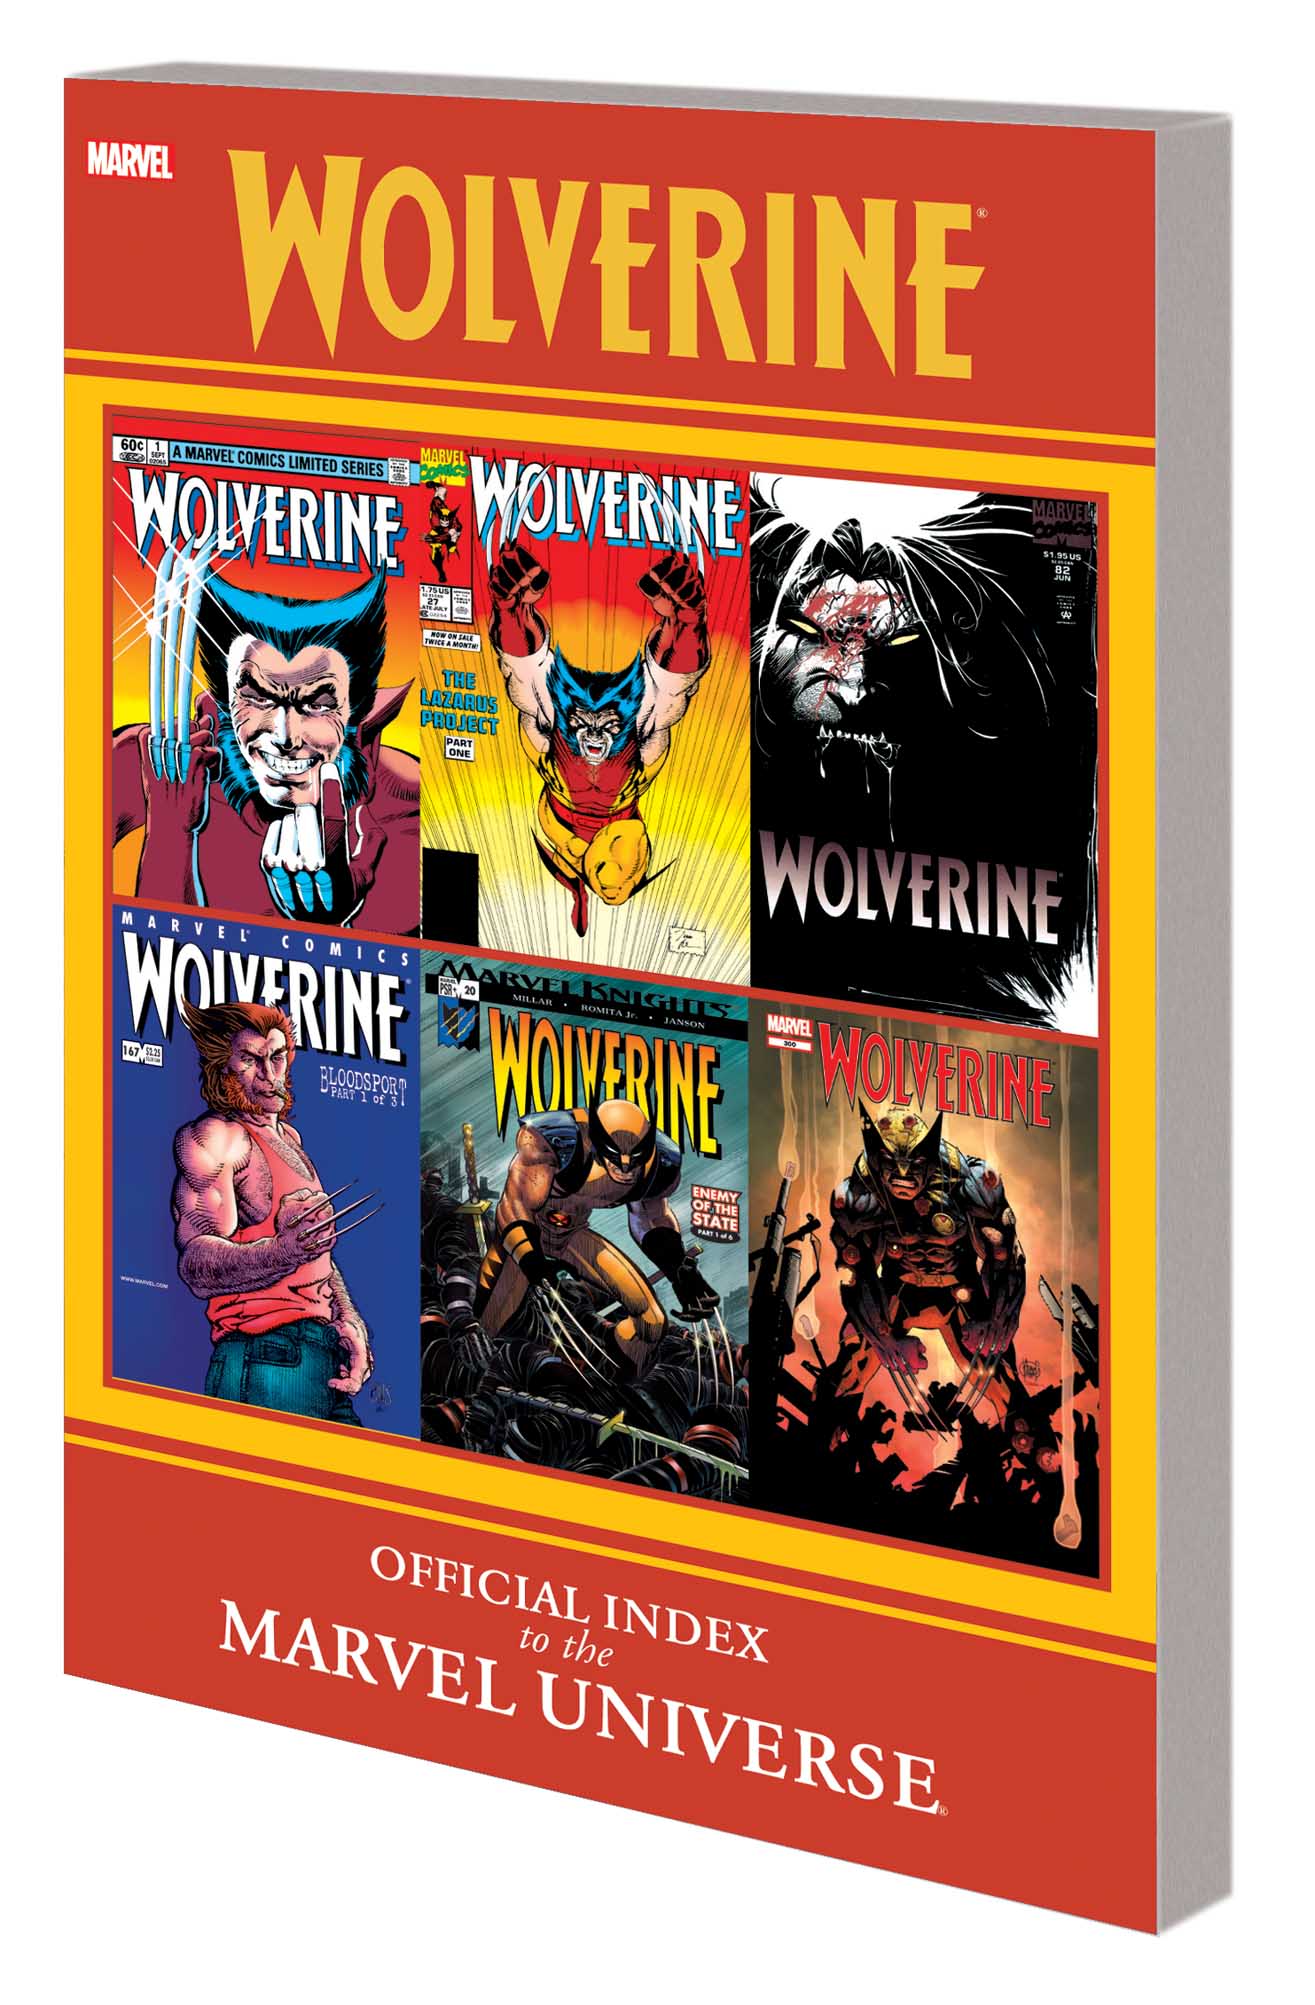 Wolverine: Official Index to the Marvel Universe GN-TPB (Trade Paperback)